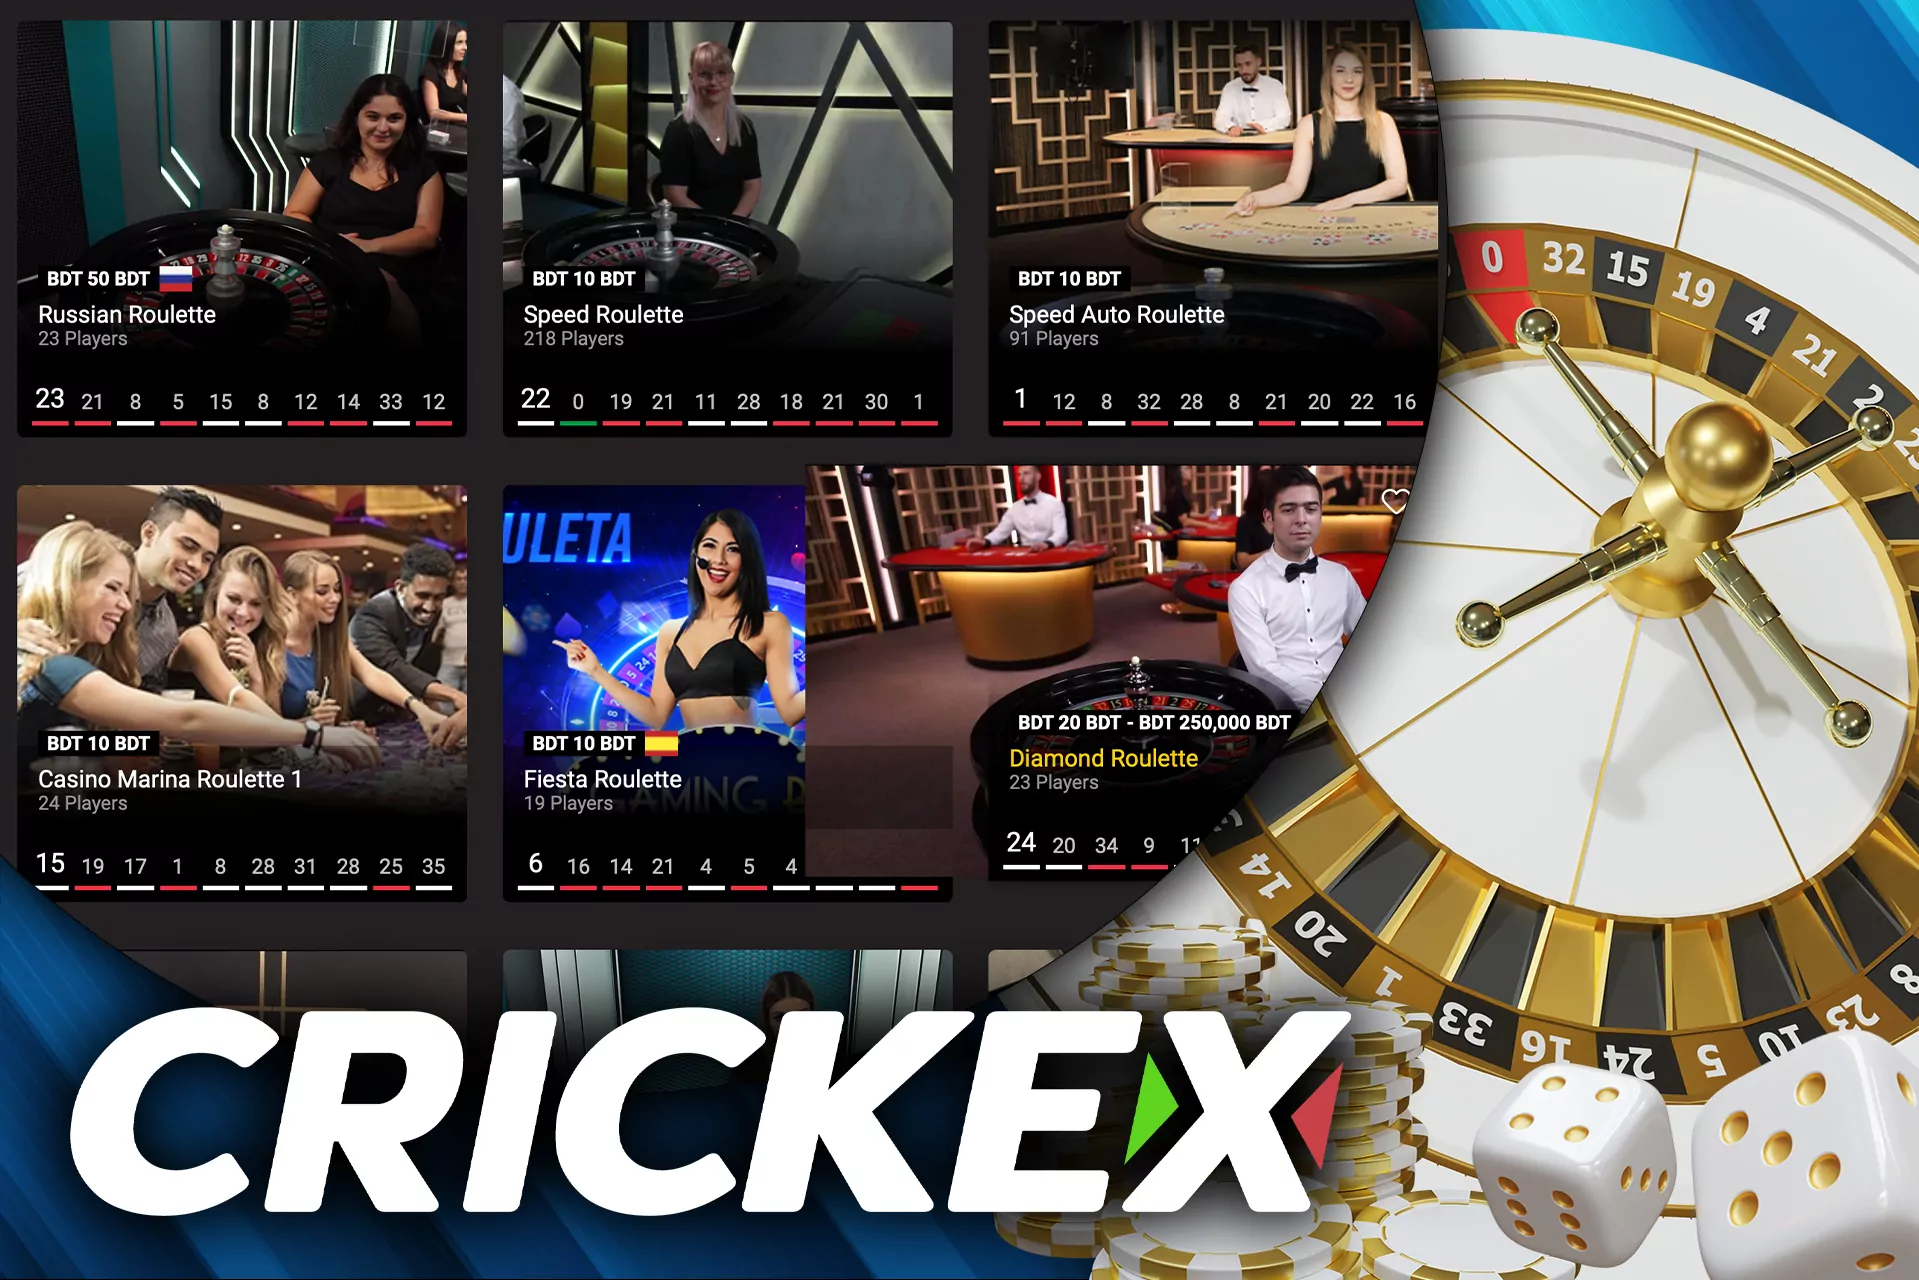 There are different roulette types in the Crickex casino.